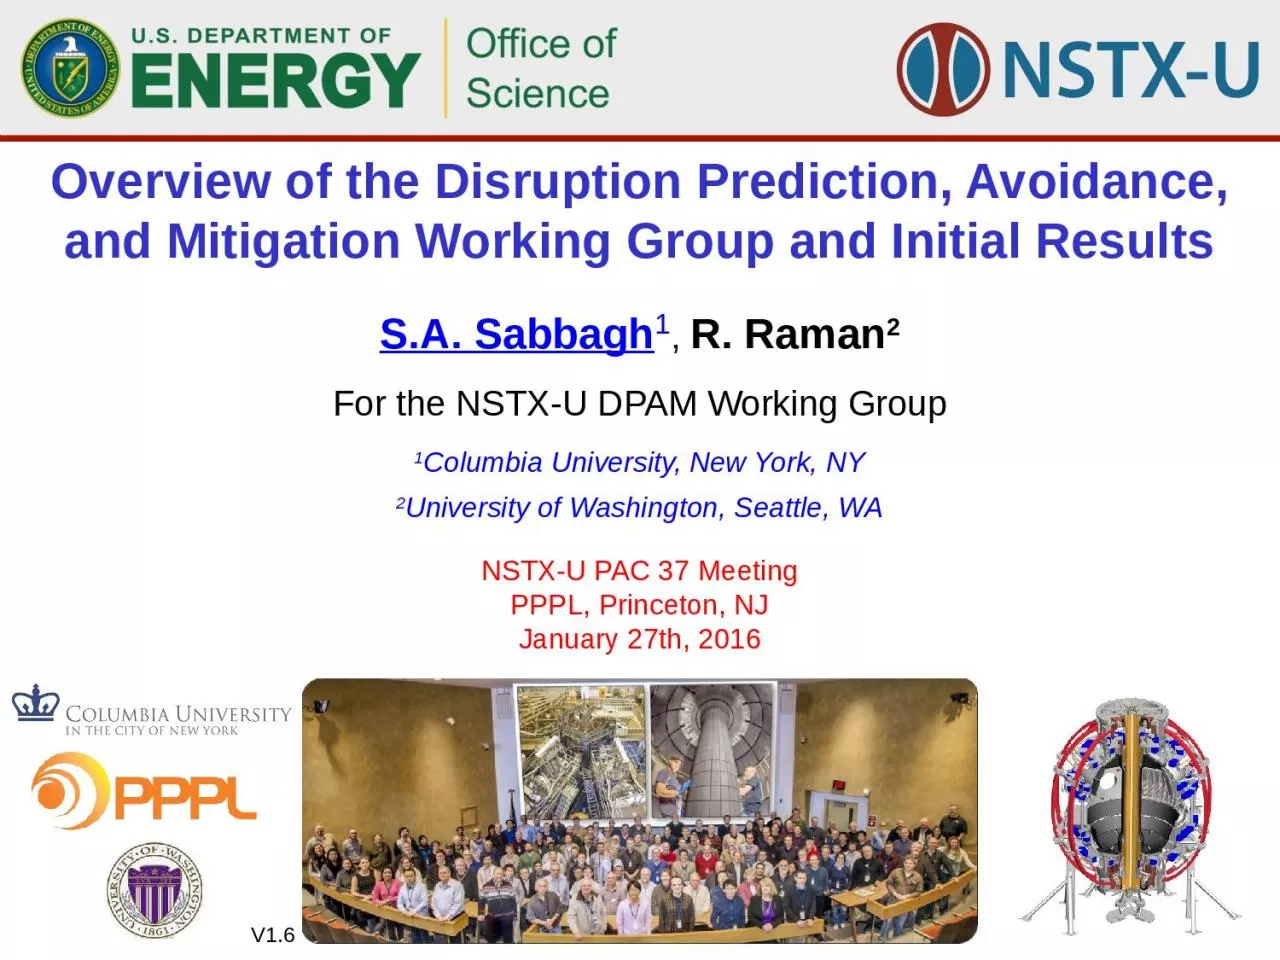 Overview of the Disruption Prediction, Avoidance, and Mitigation Working Group and Initial